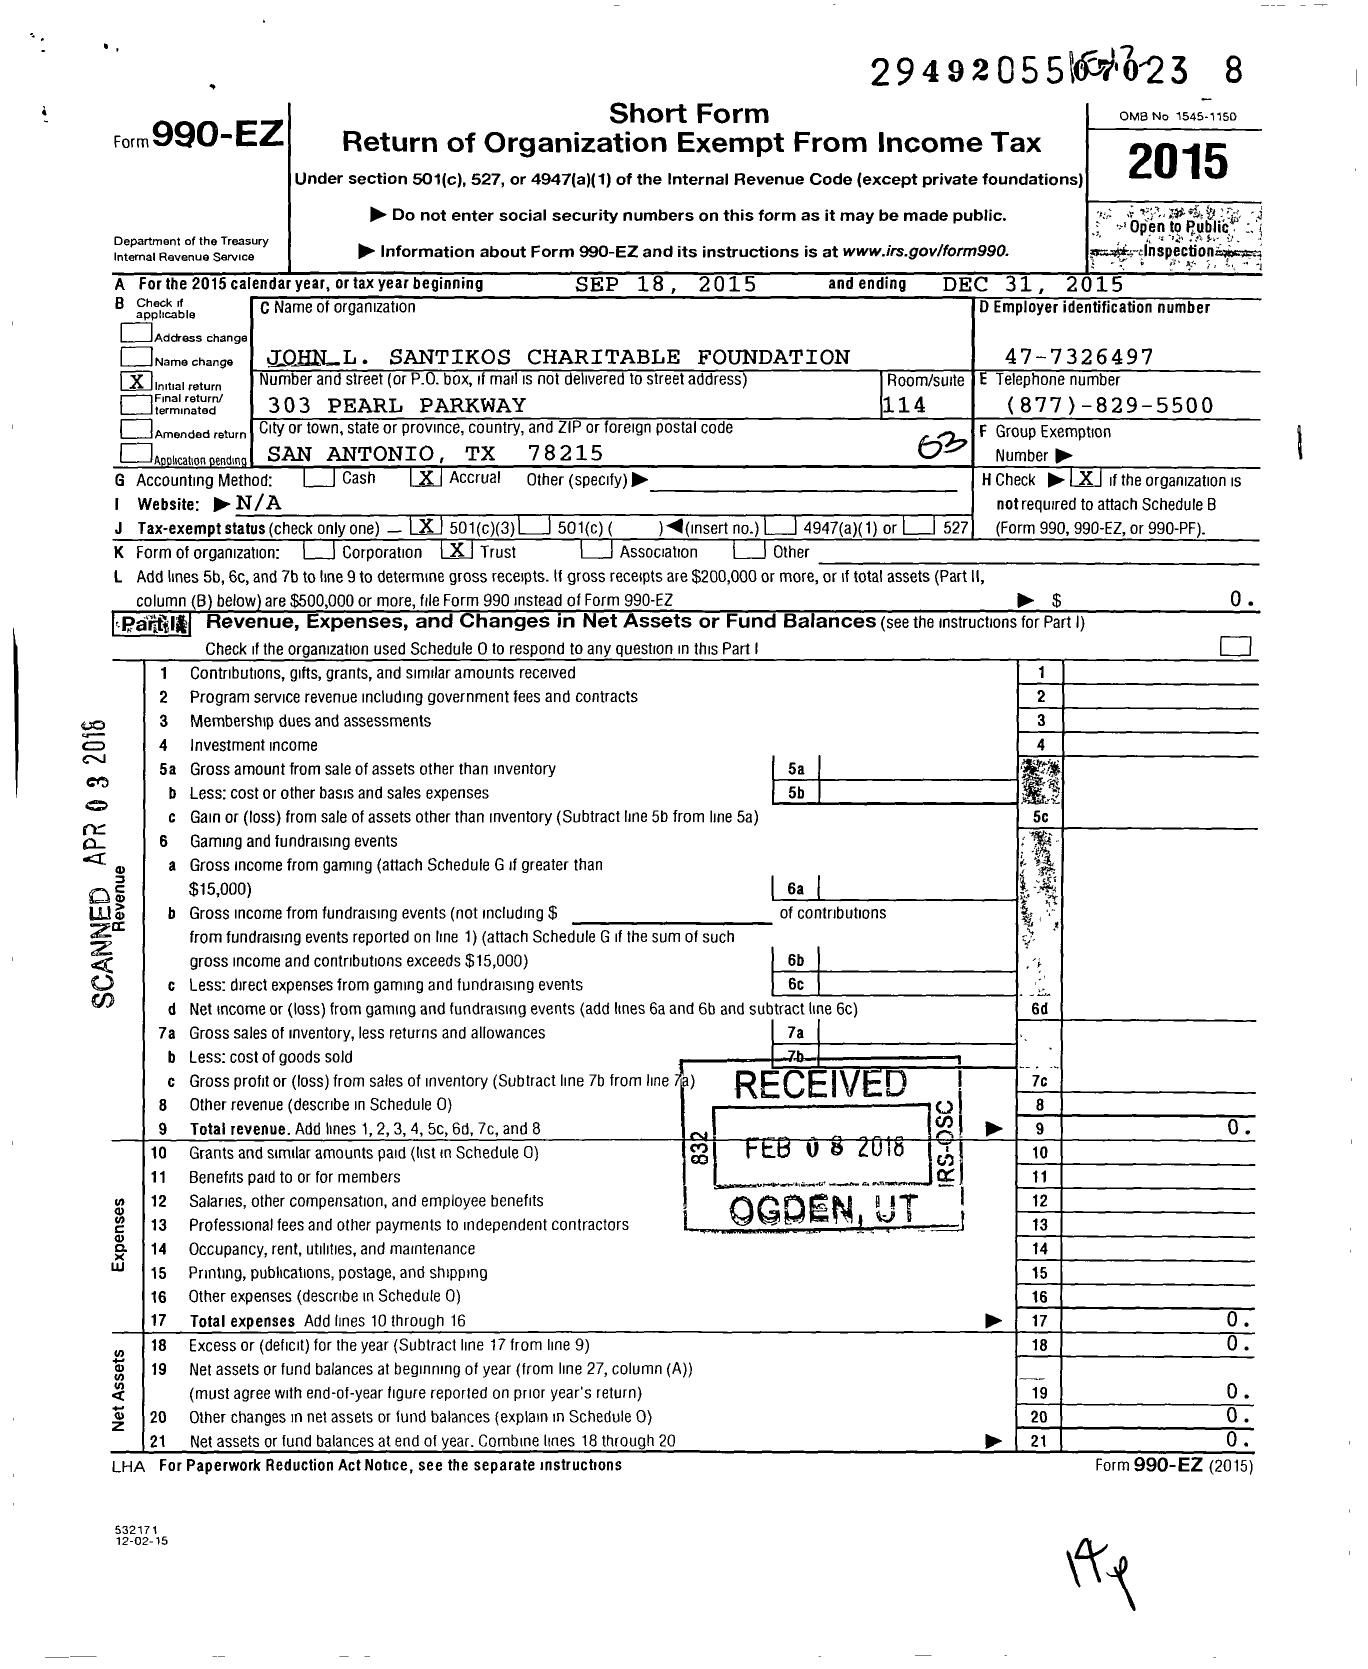 Image of first page of 2015 Form 990EZ for John L Santikos Charitable Foundation